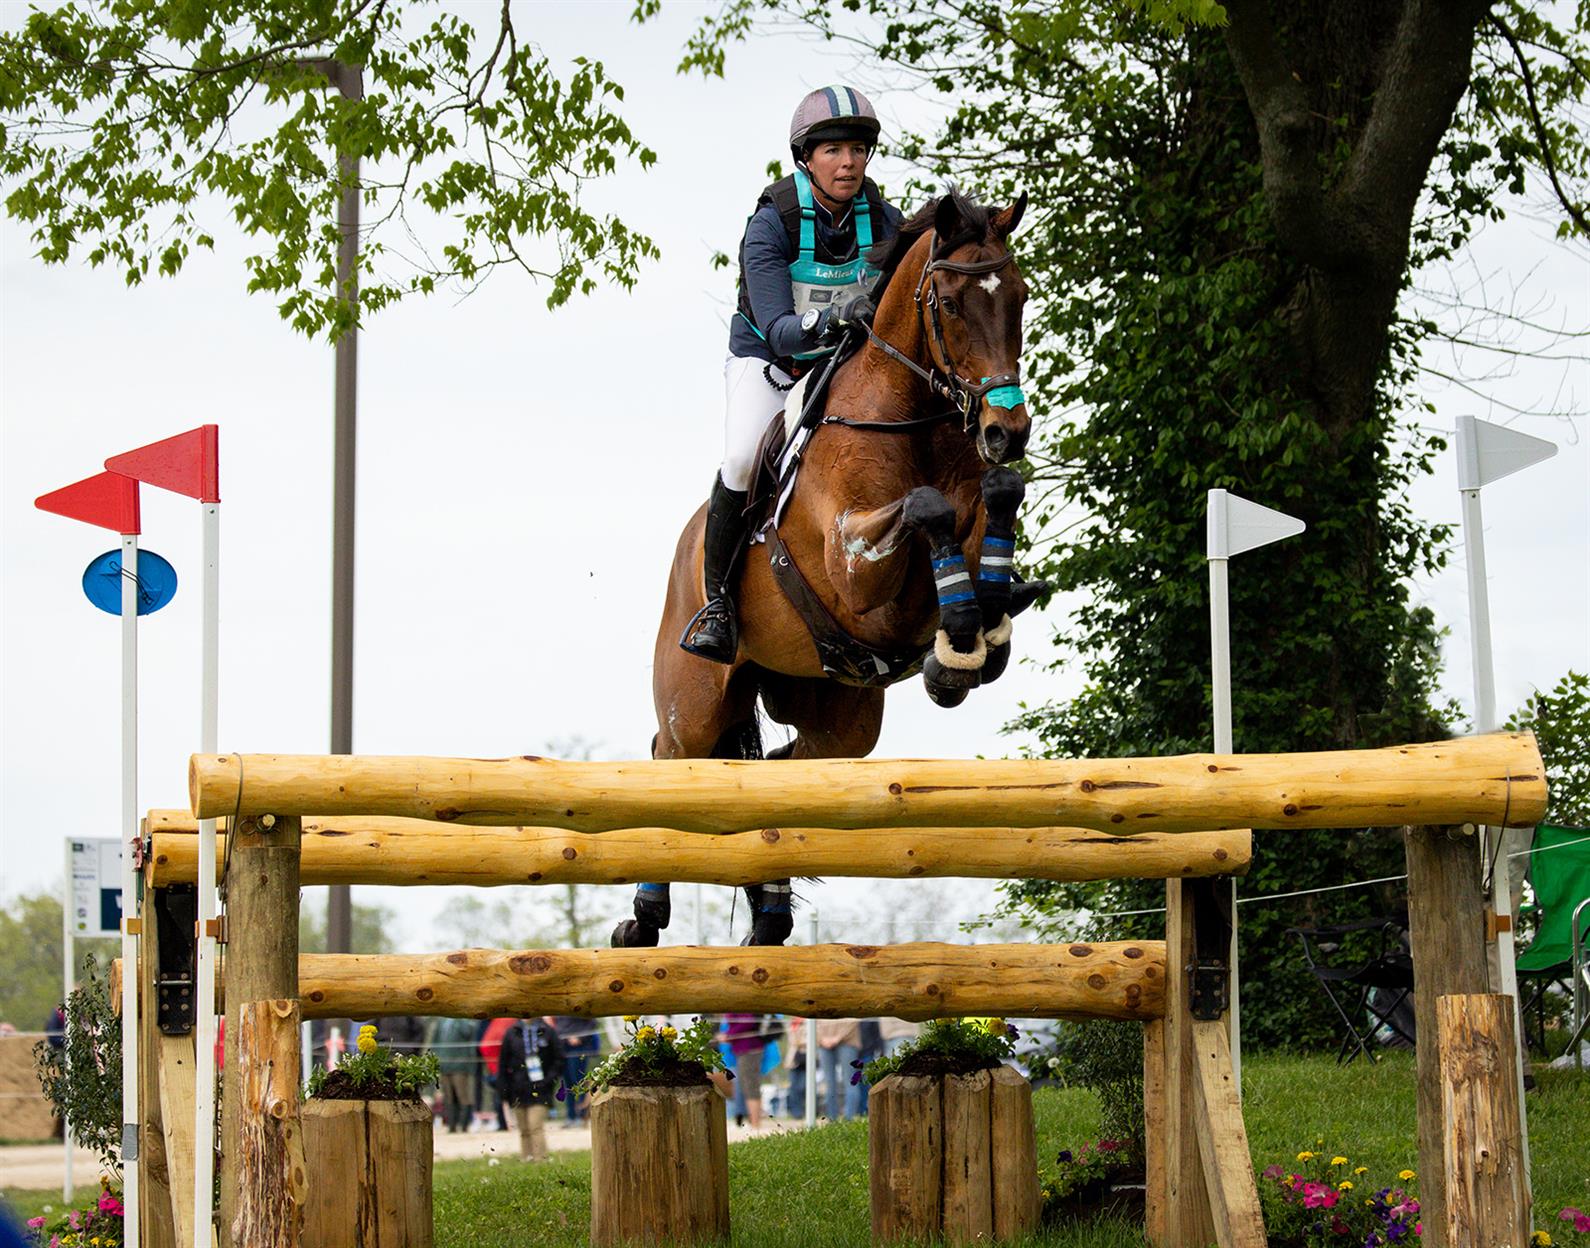 Meghan O'Donoghue and Palm Crescent clearing Wofford's Rails